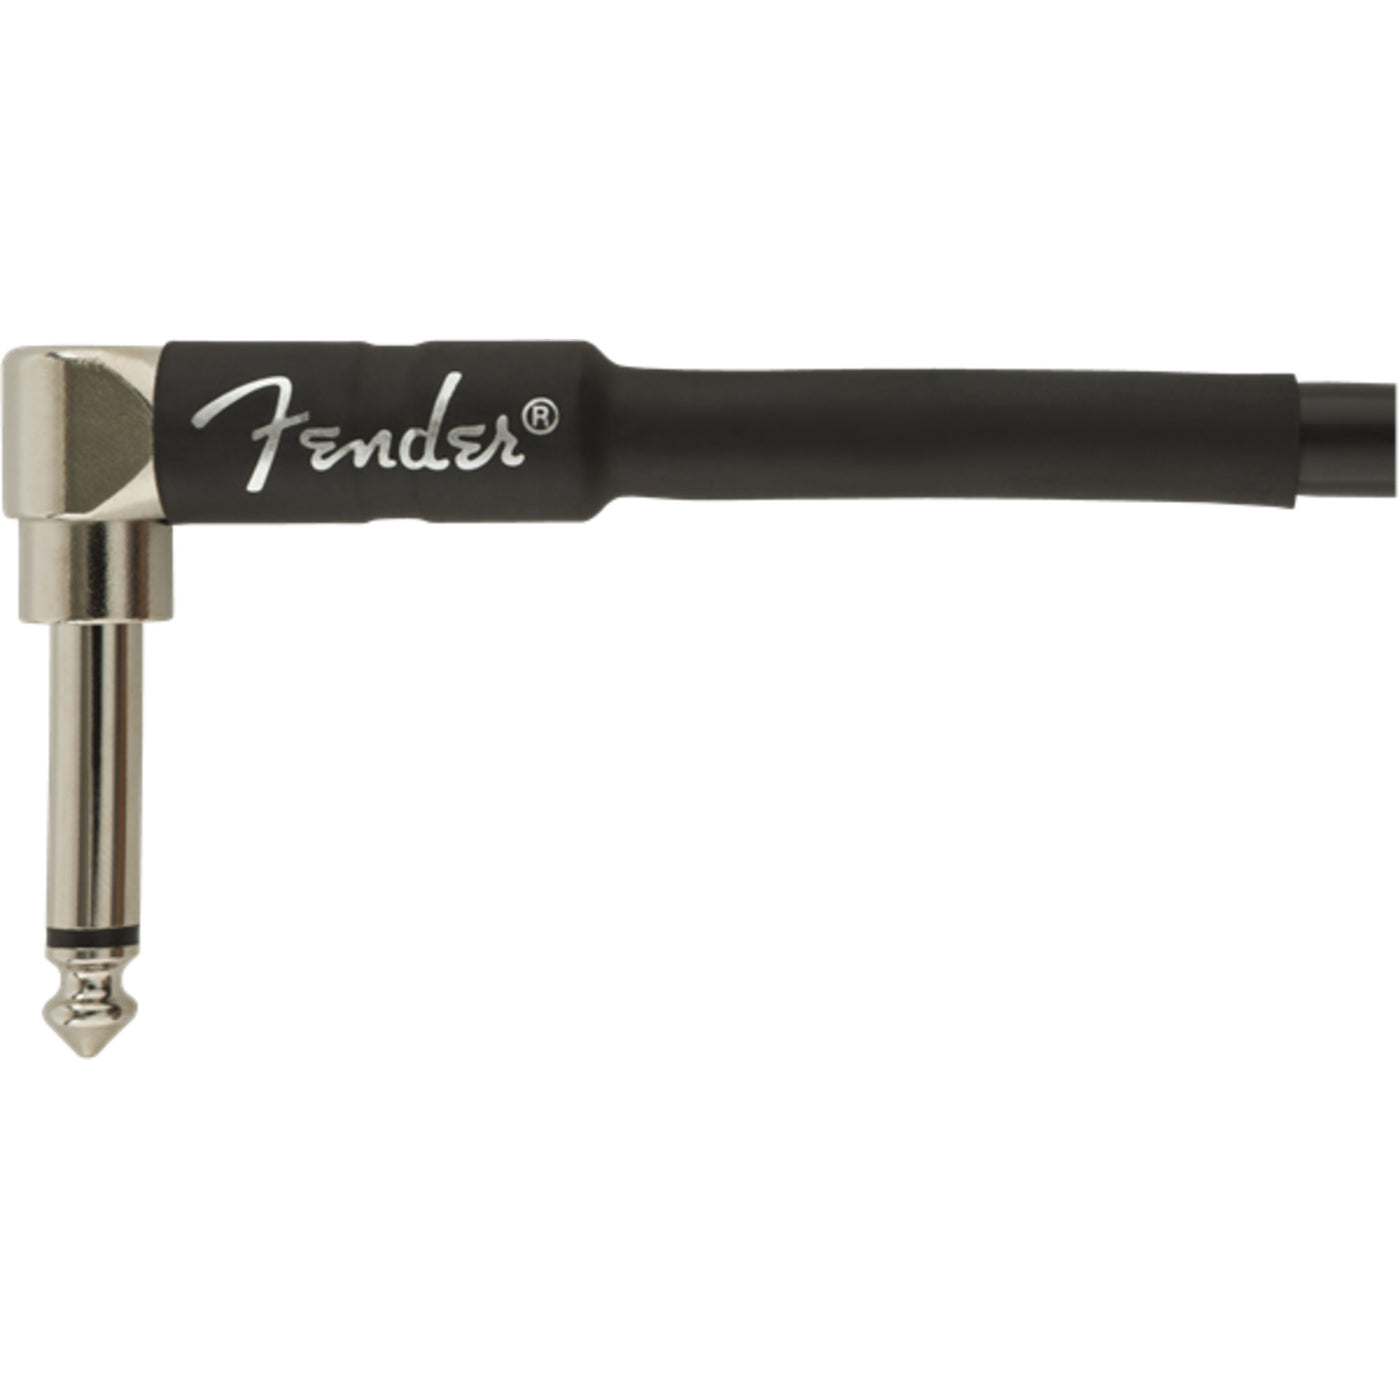 Fender Professional Series 10-Foot Straight to Angle Instrument Cable, Black (0990820025)